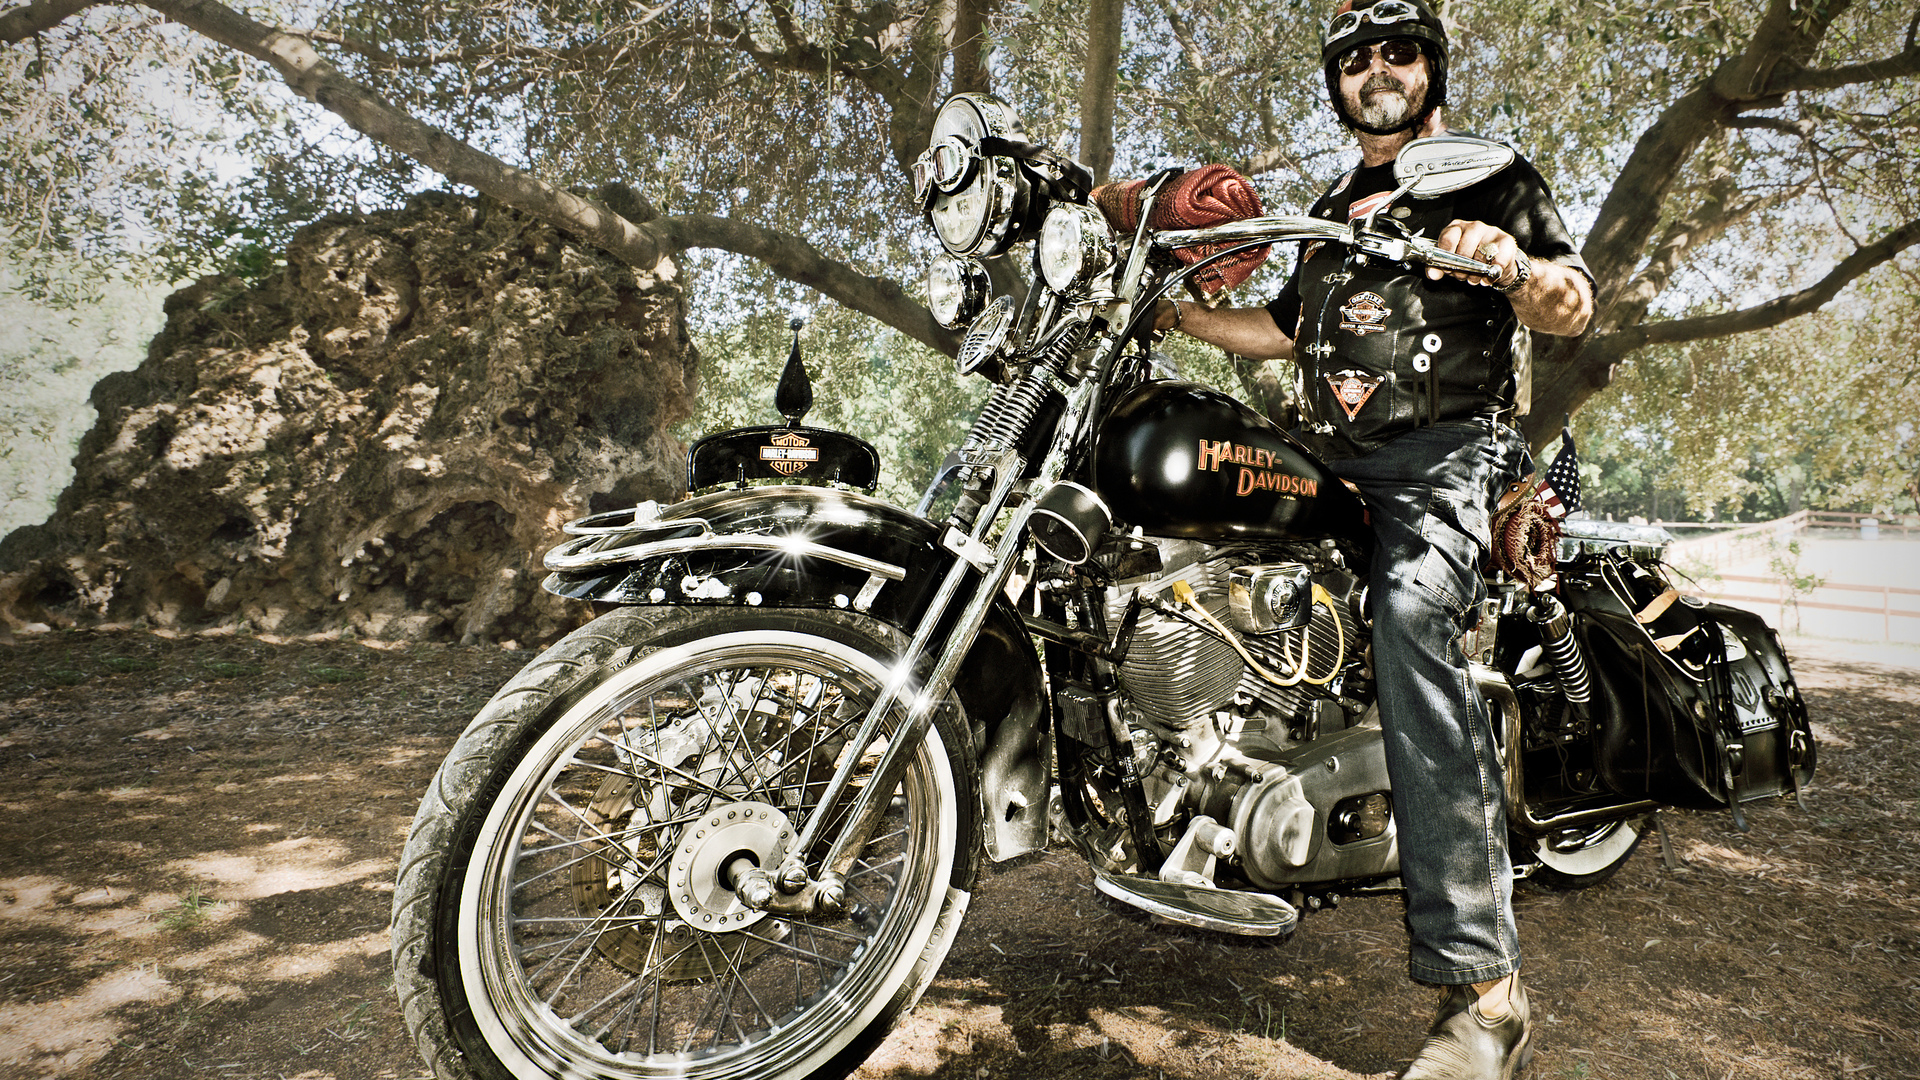 A view of a rider enjoying their Harley Davidson motorcycle